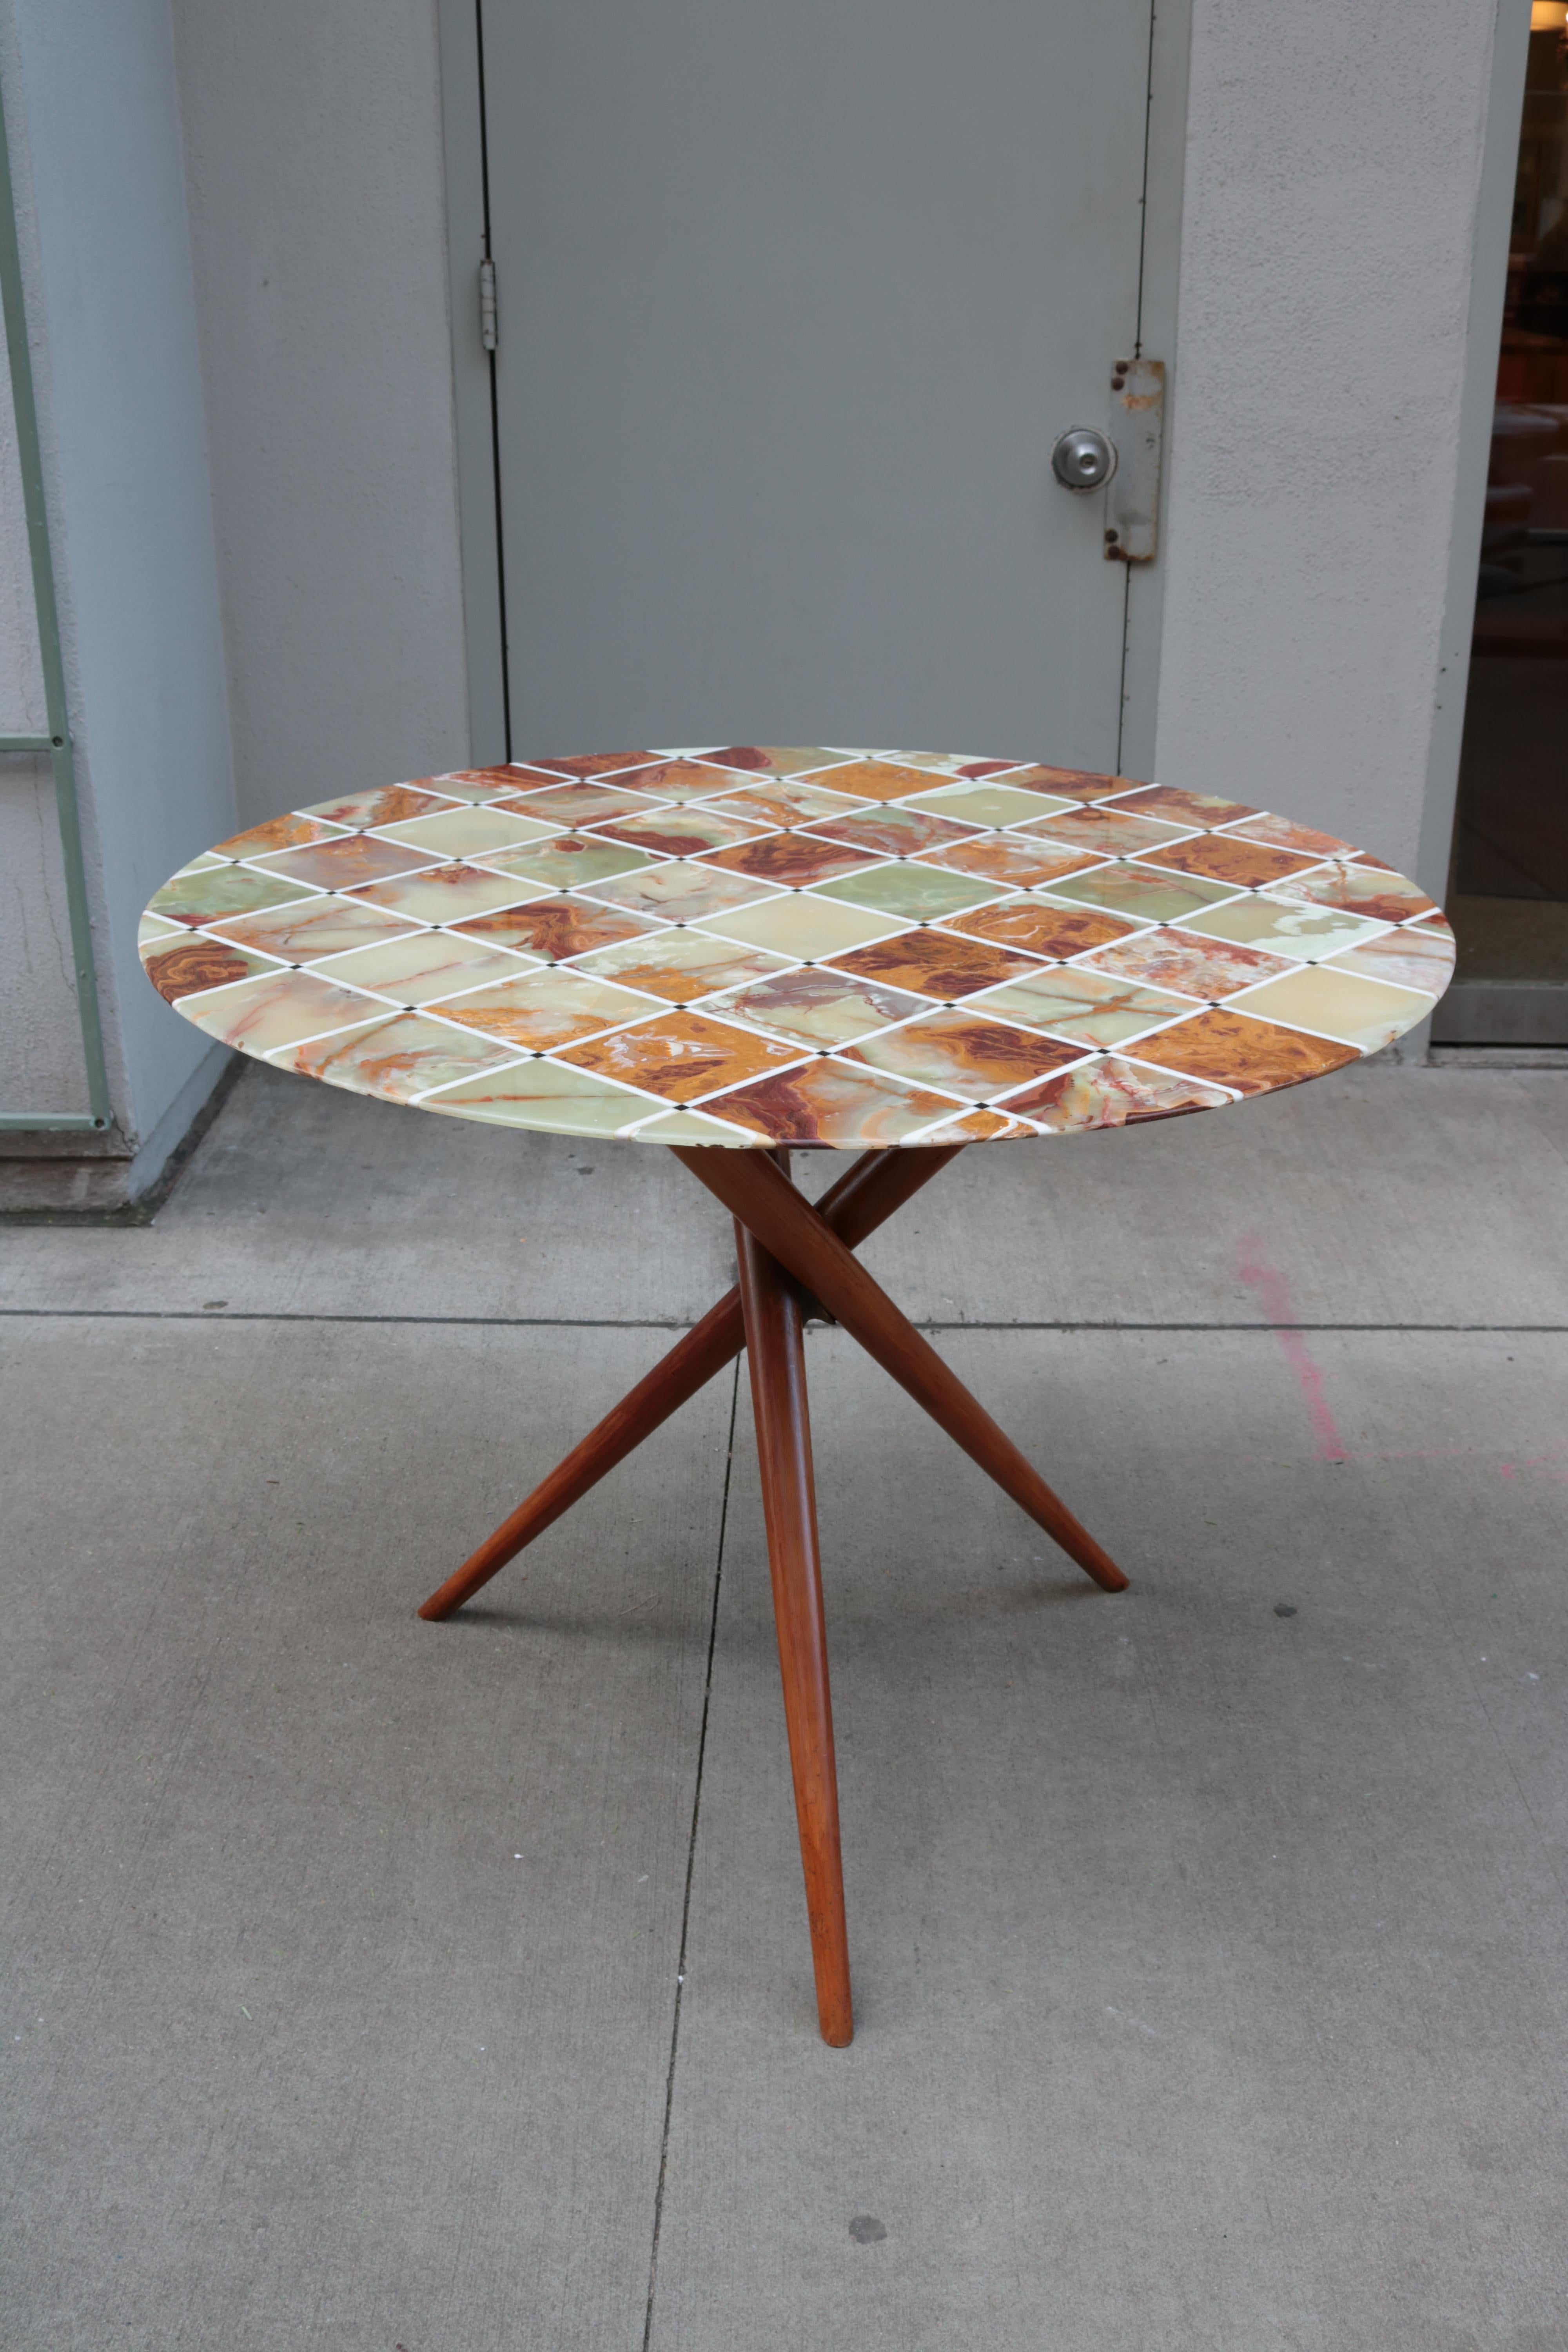 Midcentury center table with fine Inlaid stone top.
Wooden tripod base.